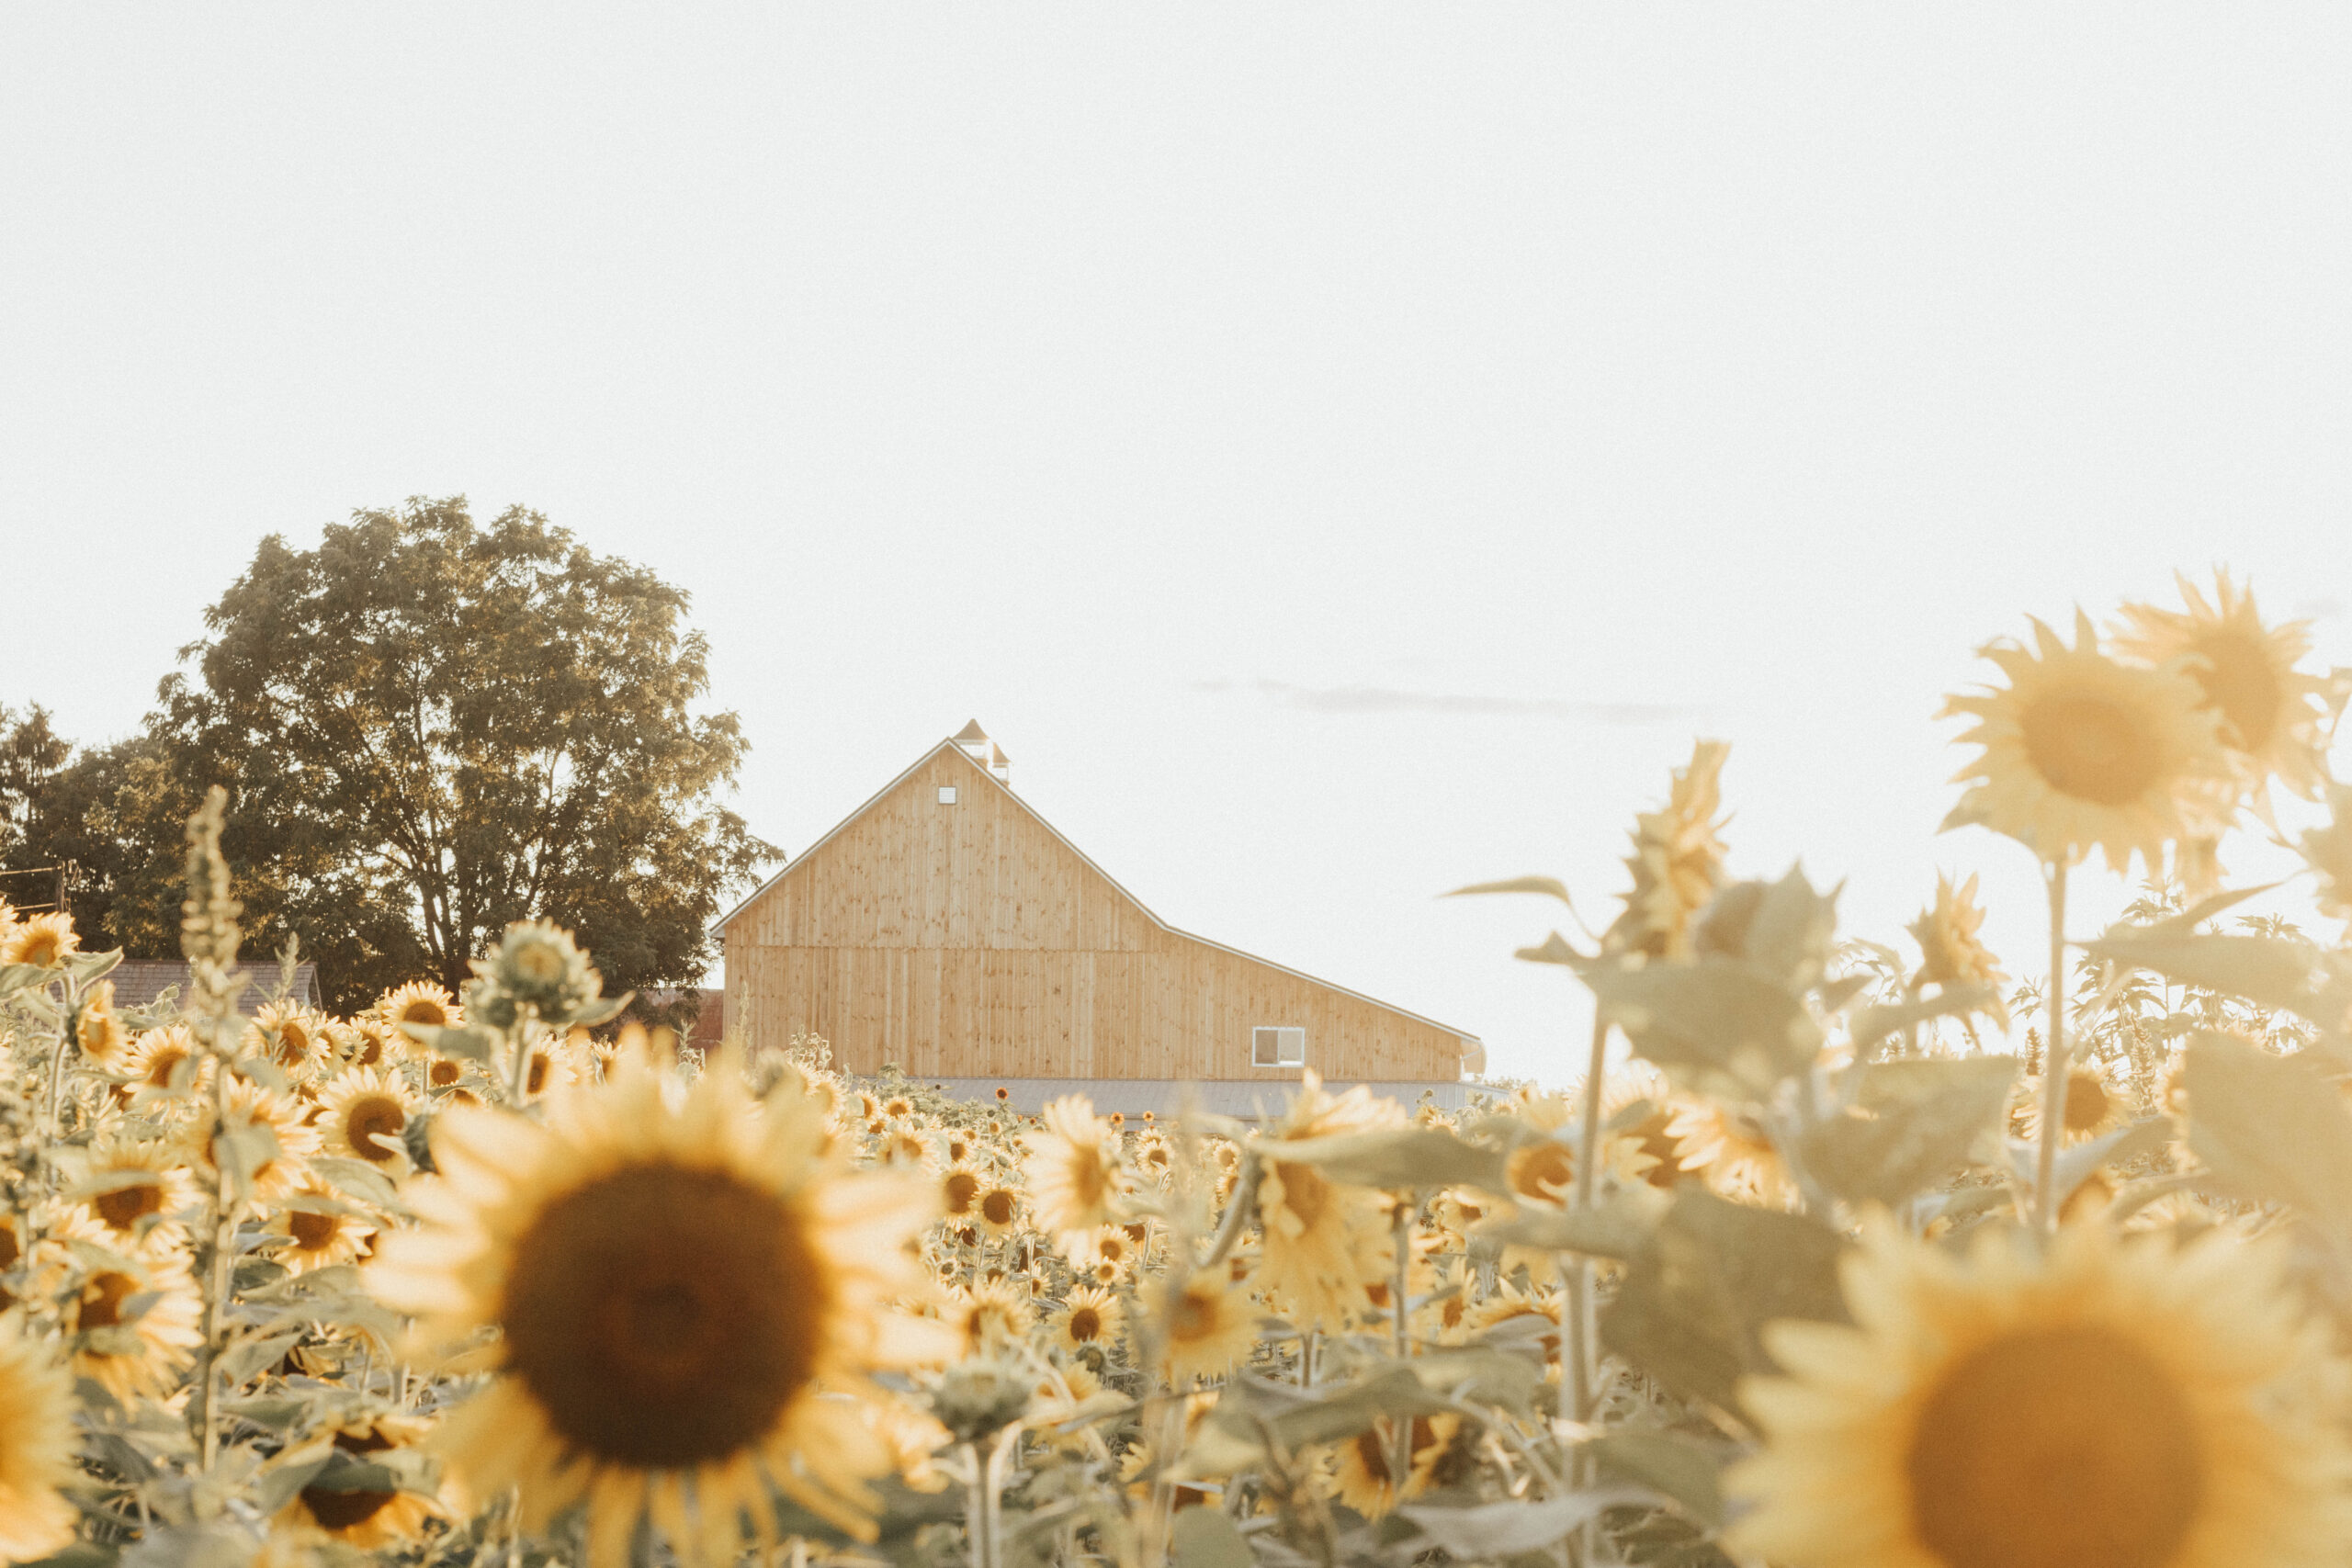 A field of sunflowers and a barn